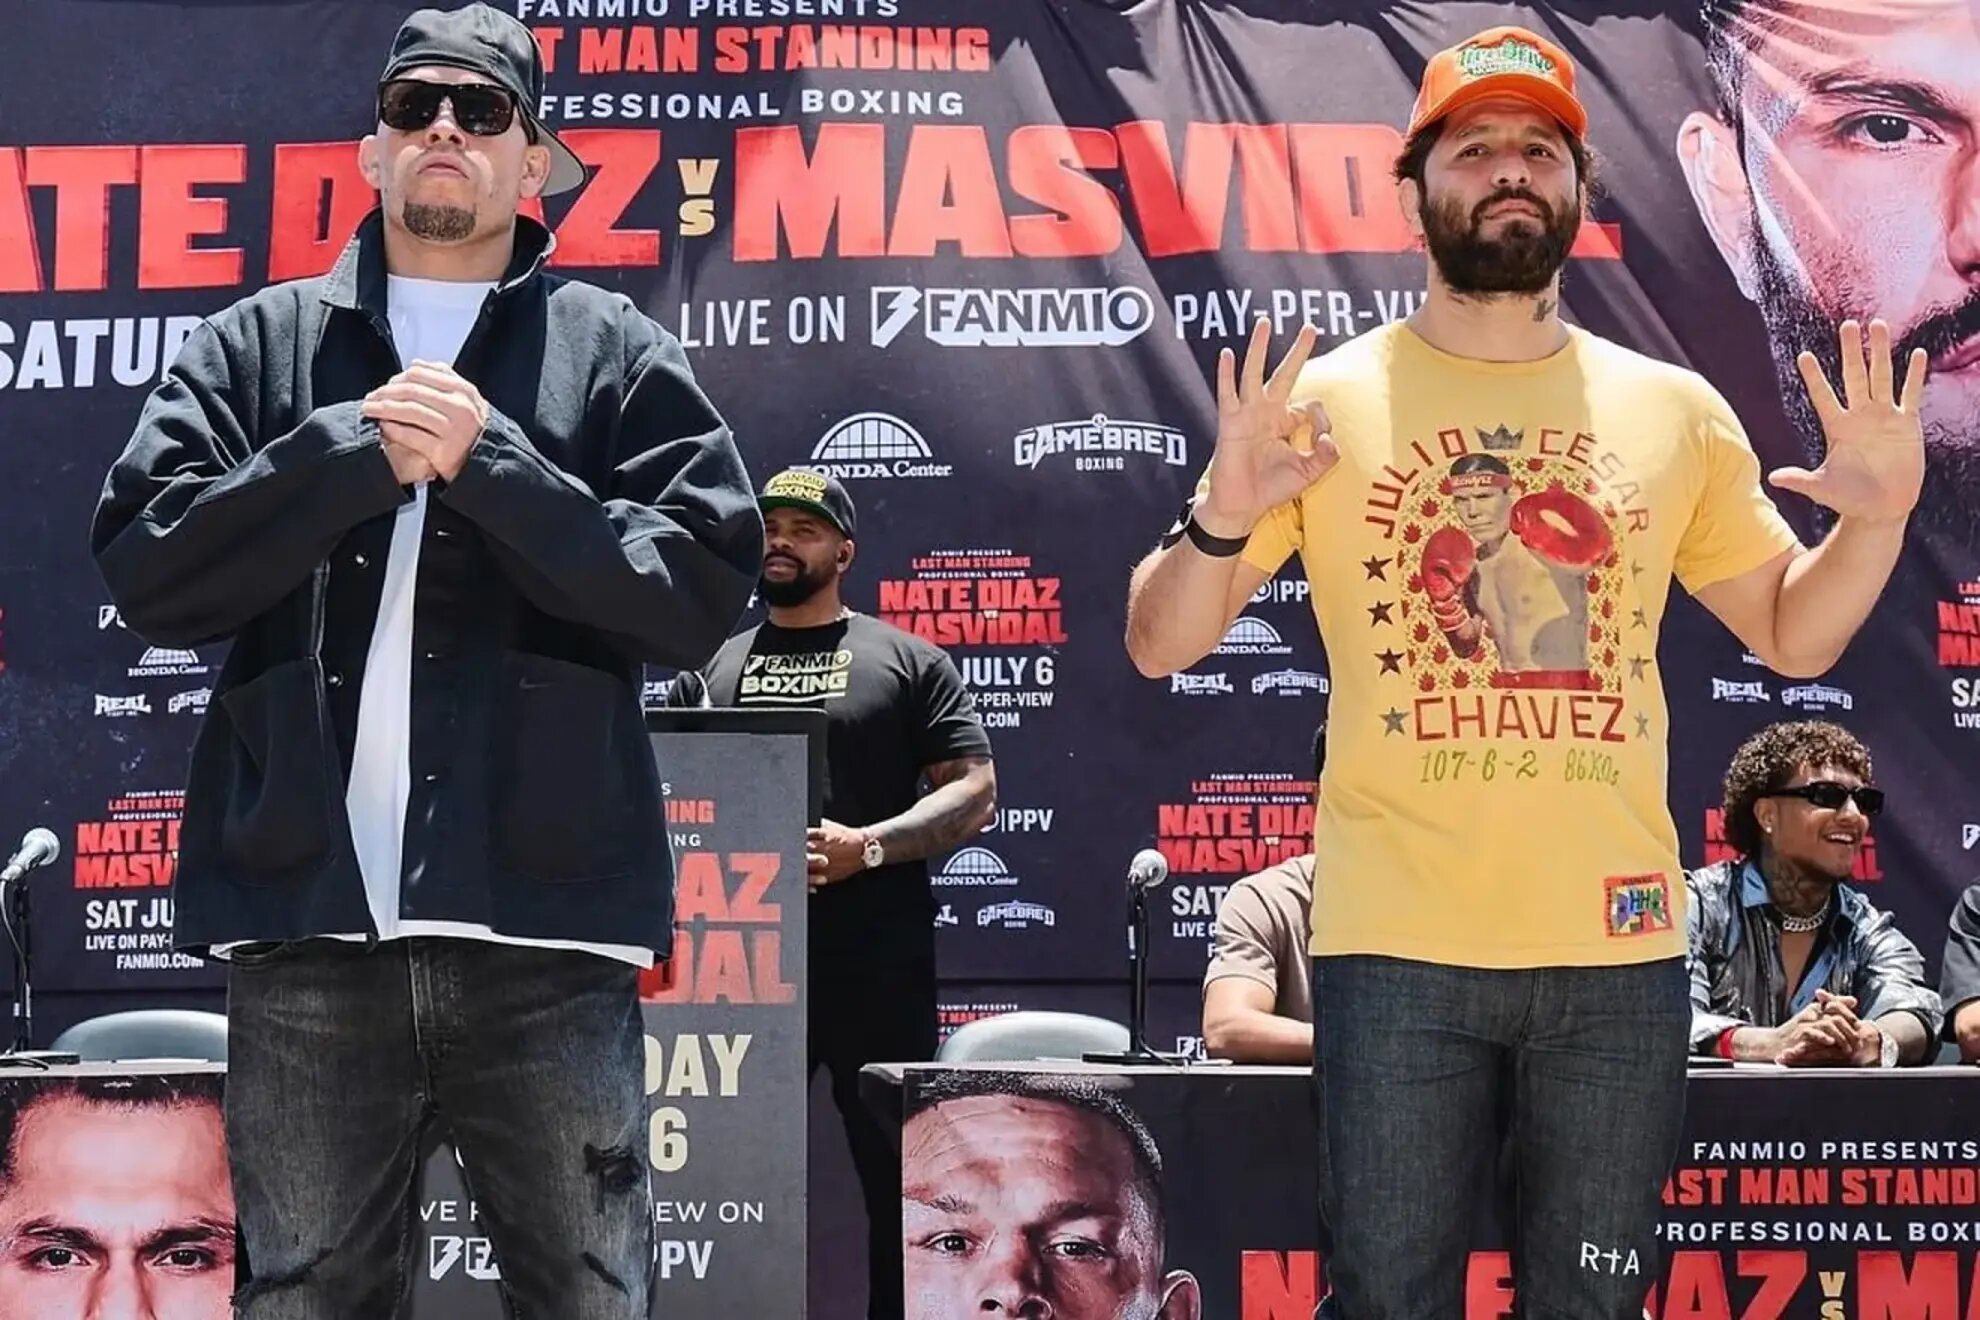 Nate Diaz and Jorge Masvidal will face each other in a rematch.